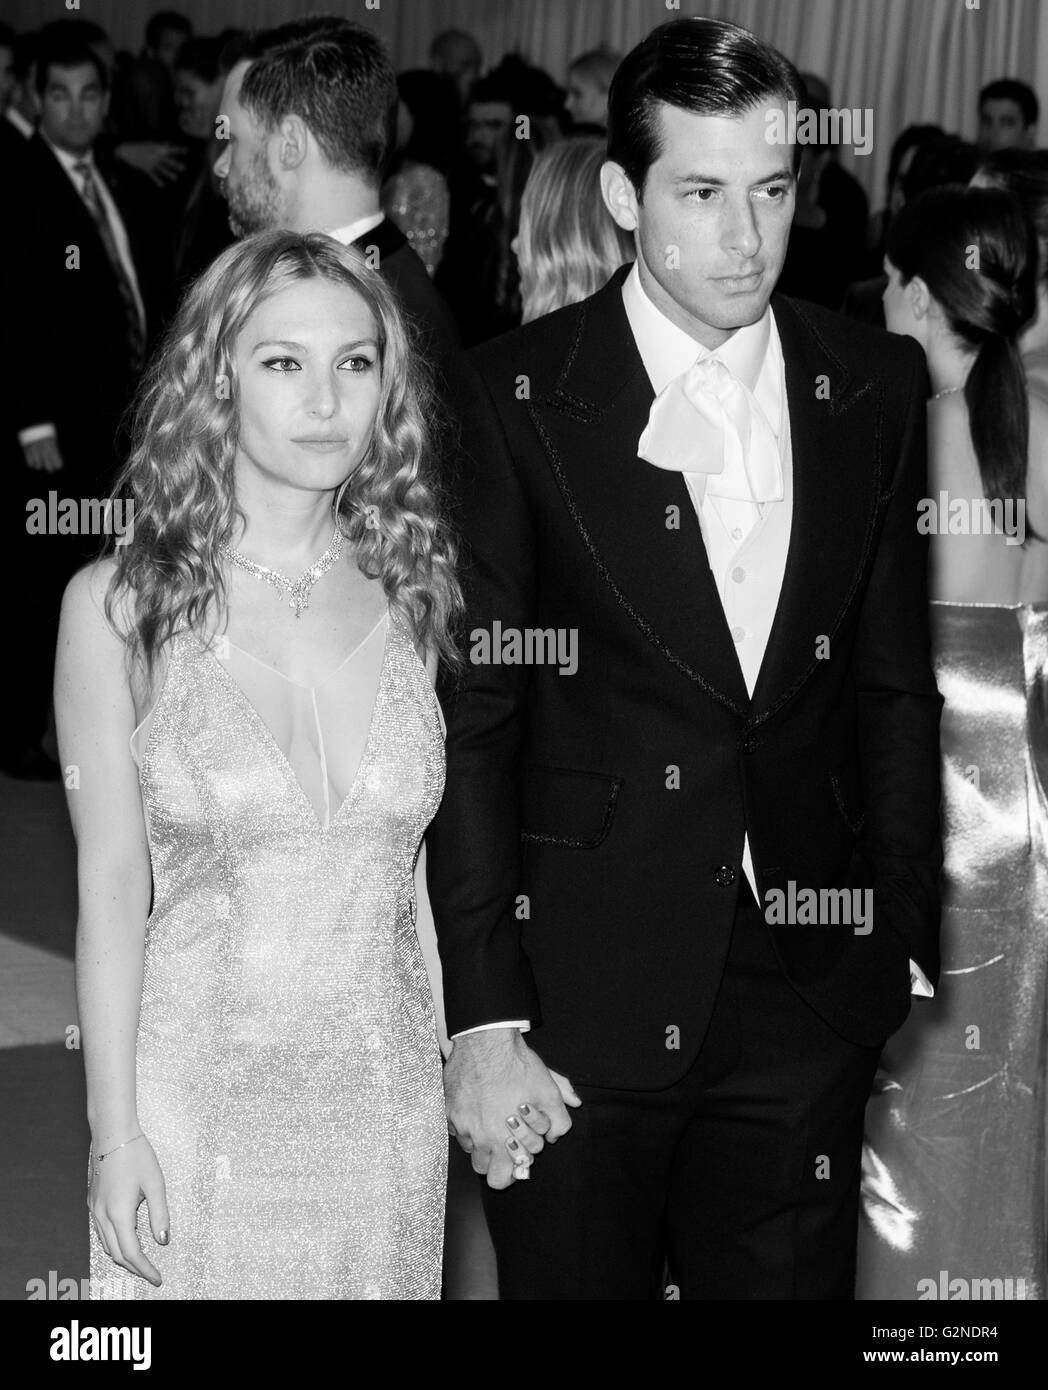 New York City, USA - May 2, 2016: Josephine de la Baume and Mark Ronson attend the 2016 Met Gala Stock Photo